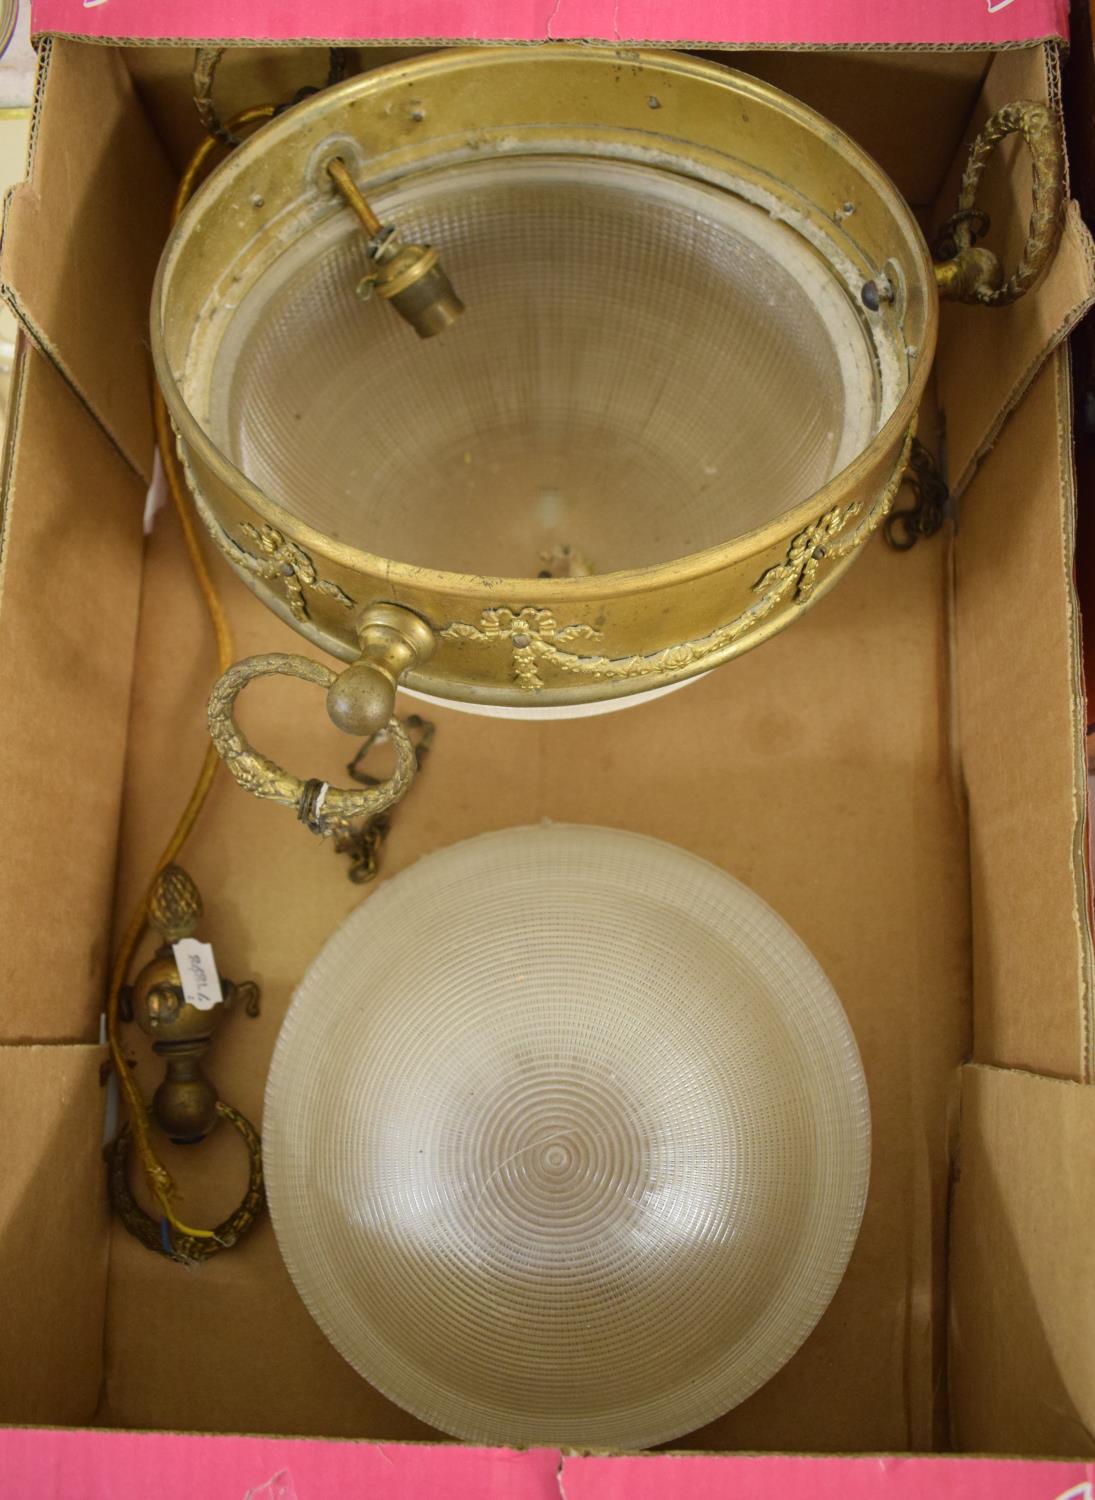 An early 20th century light fitting, decorated ribbon ties and floral swags, with two moulded